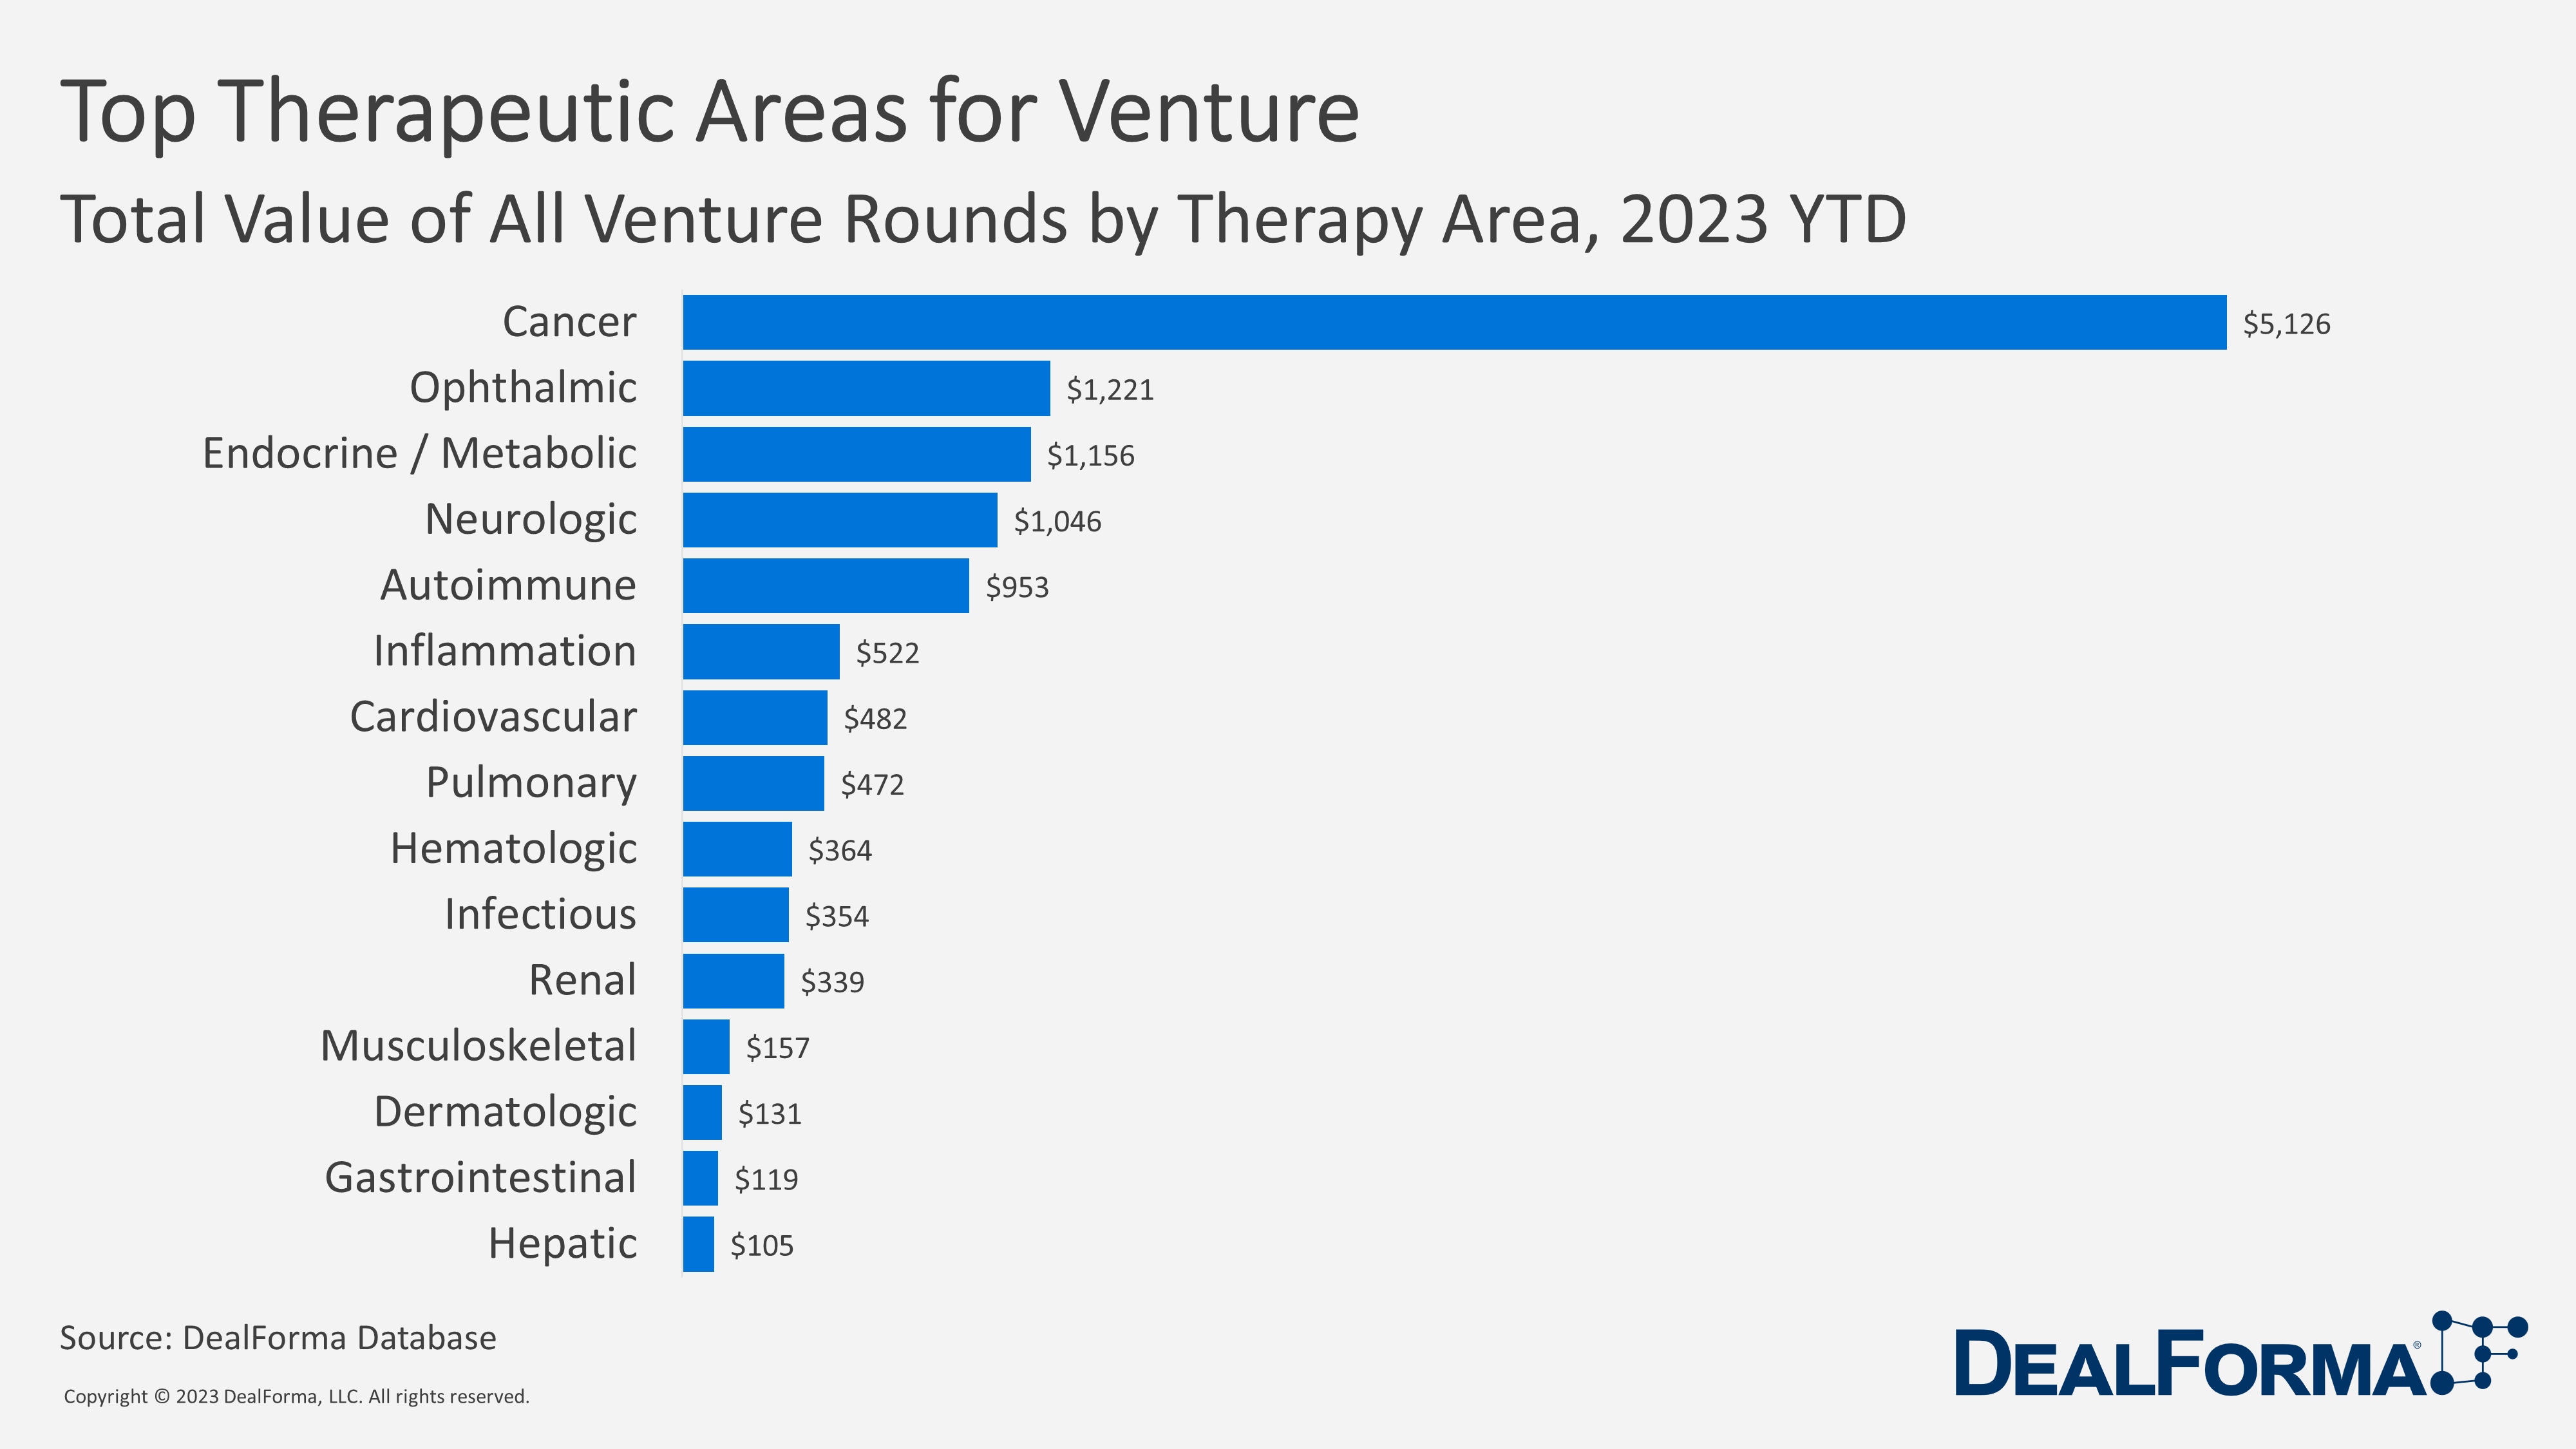 Top Therapeutic Area for Venture. Total Value, all venture rounds, YTD 2023 - DealForma